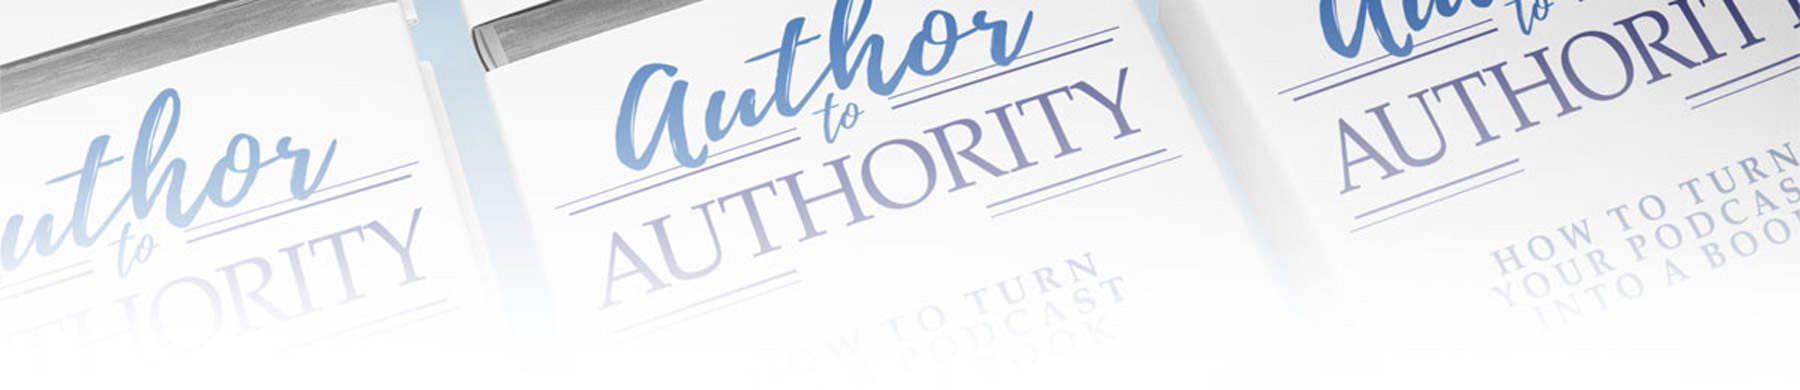 author to authority book cover banner